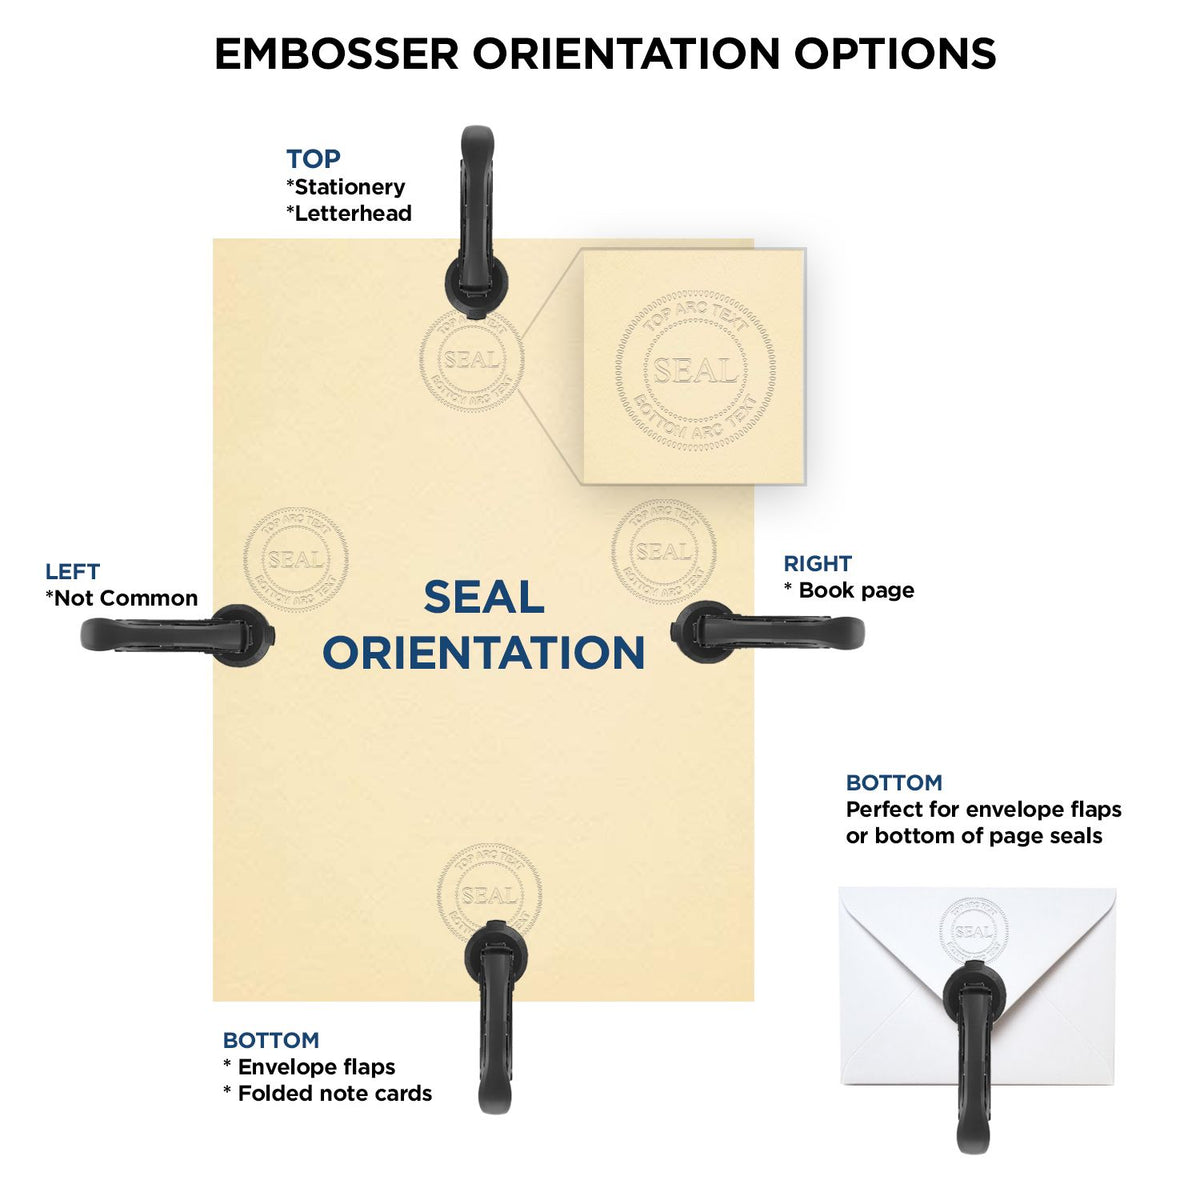 An infographic for the Handheld Maryland Professional Geologist Embosser showing embosser orientation, this is showing examples of a top, bottom, right and left insert.